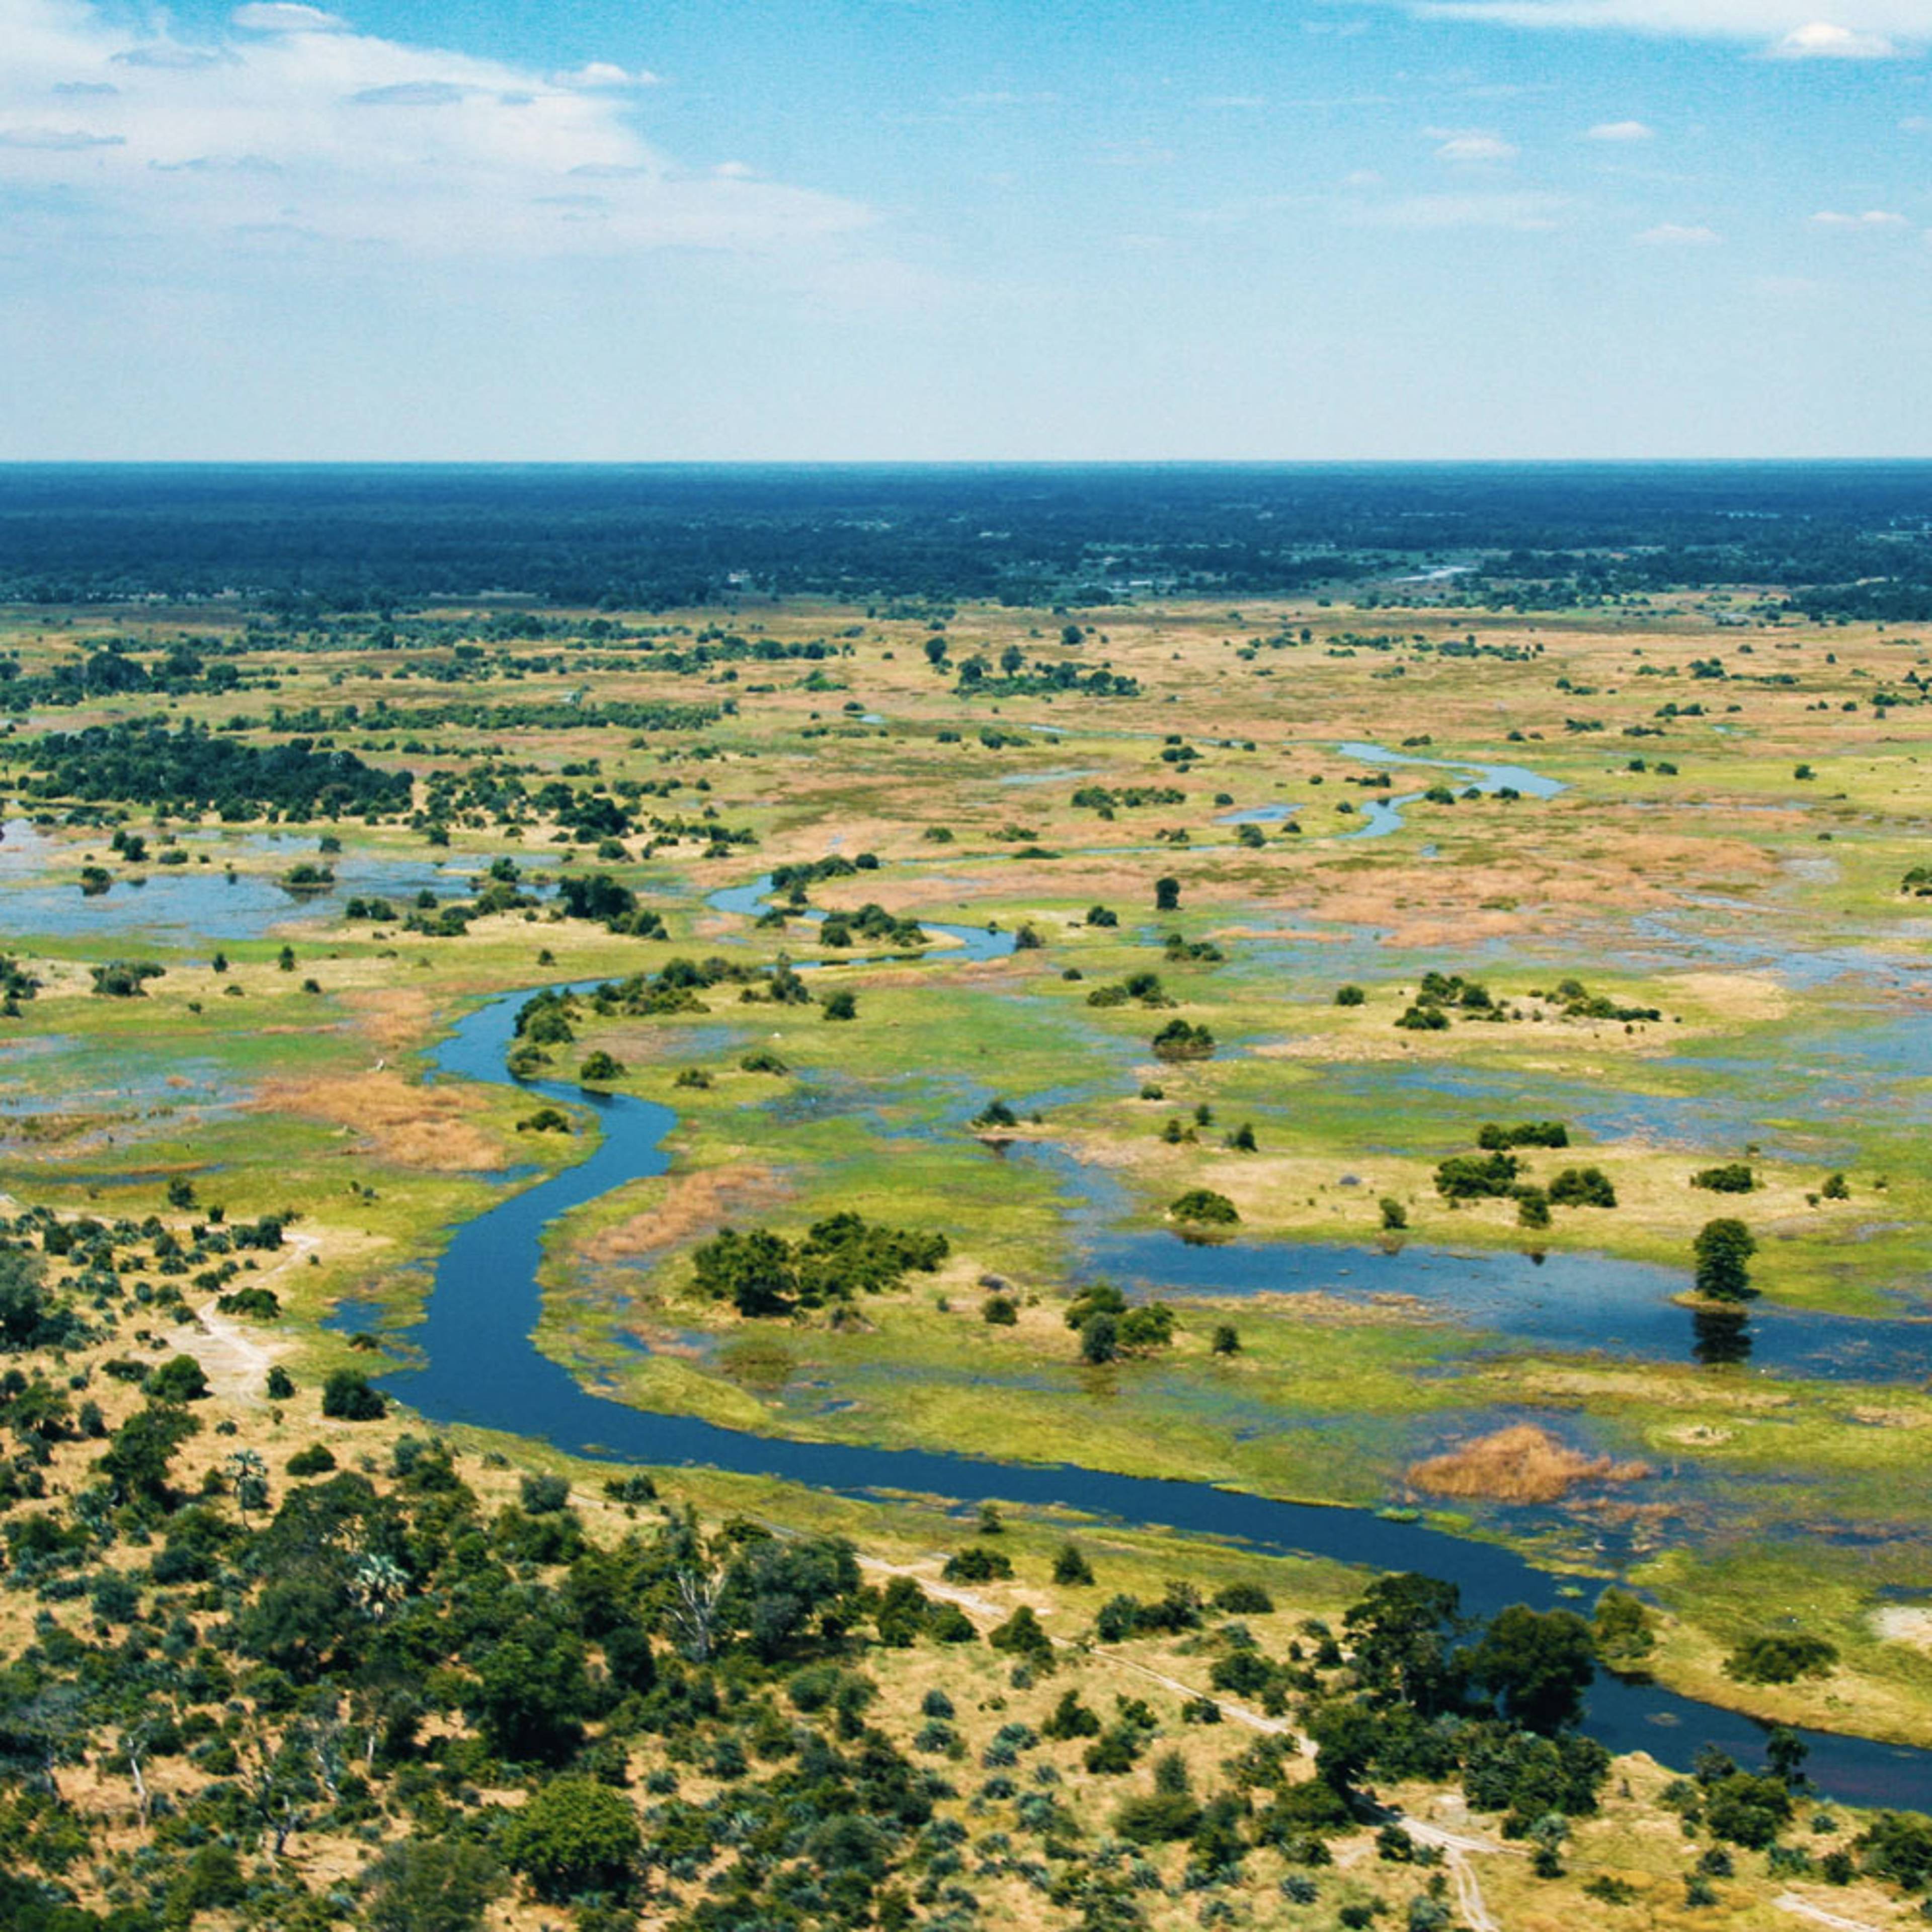 Design your perfect nature holiday with a local expert in Botswana